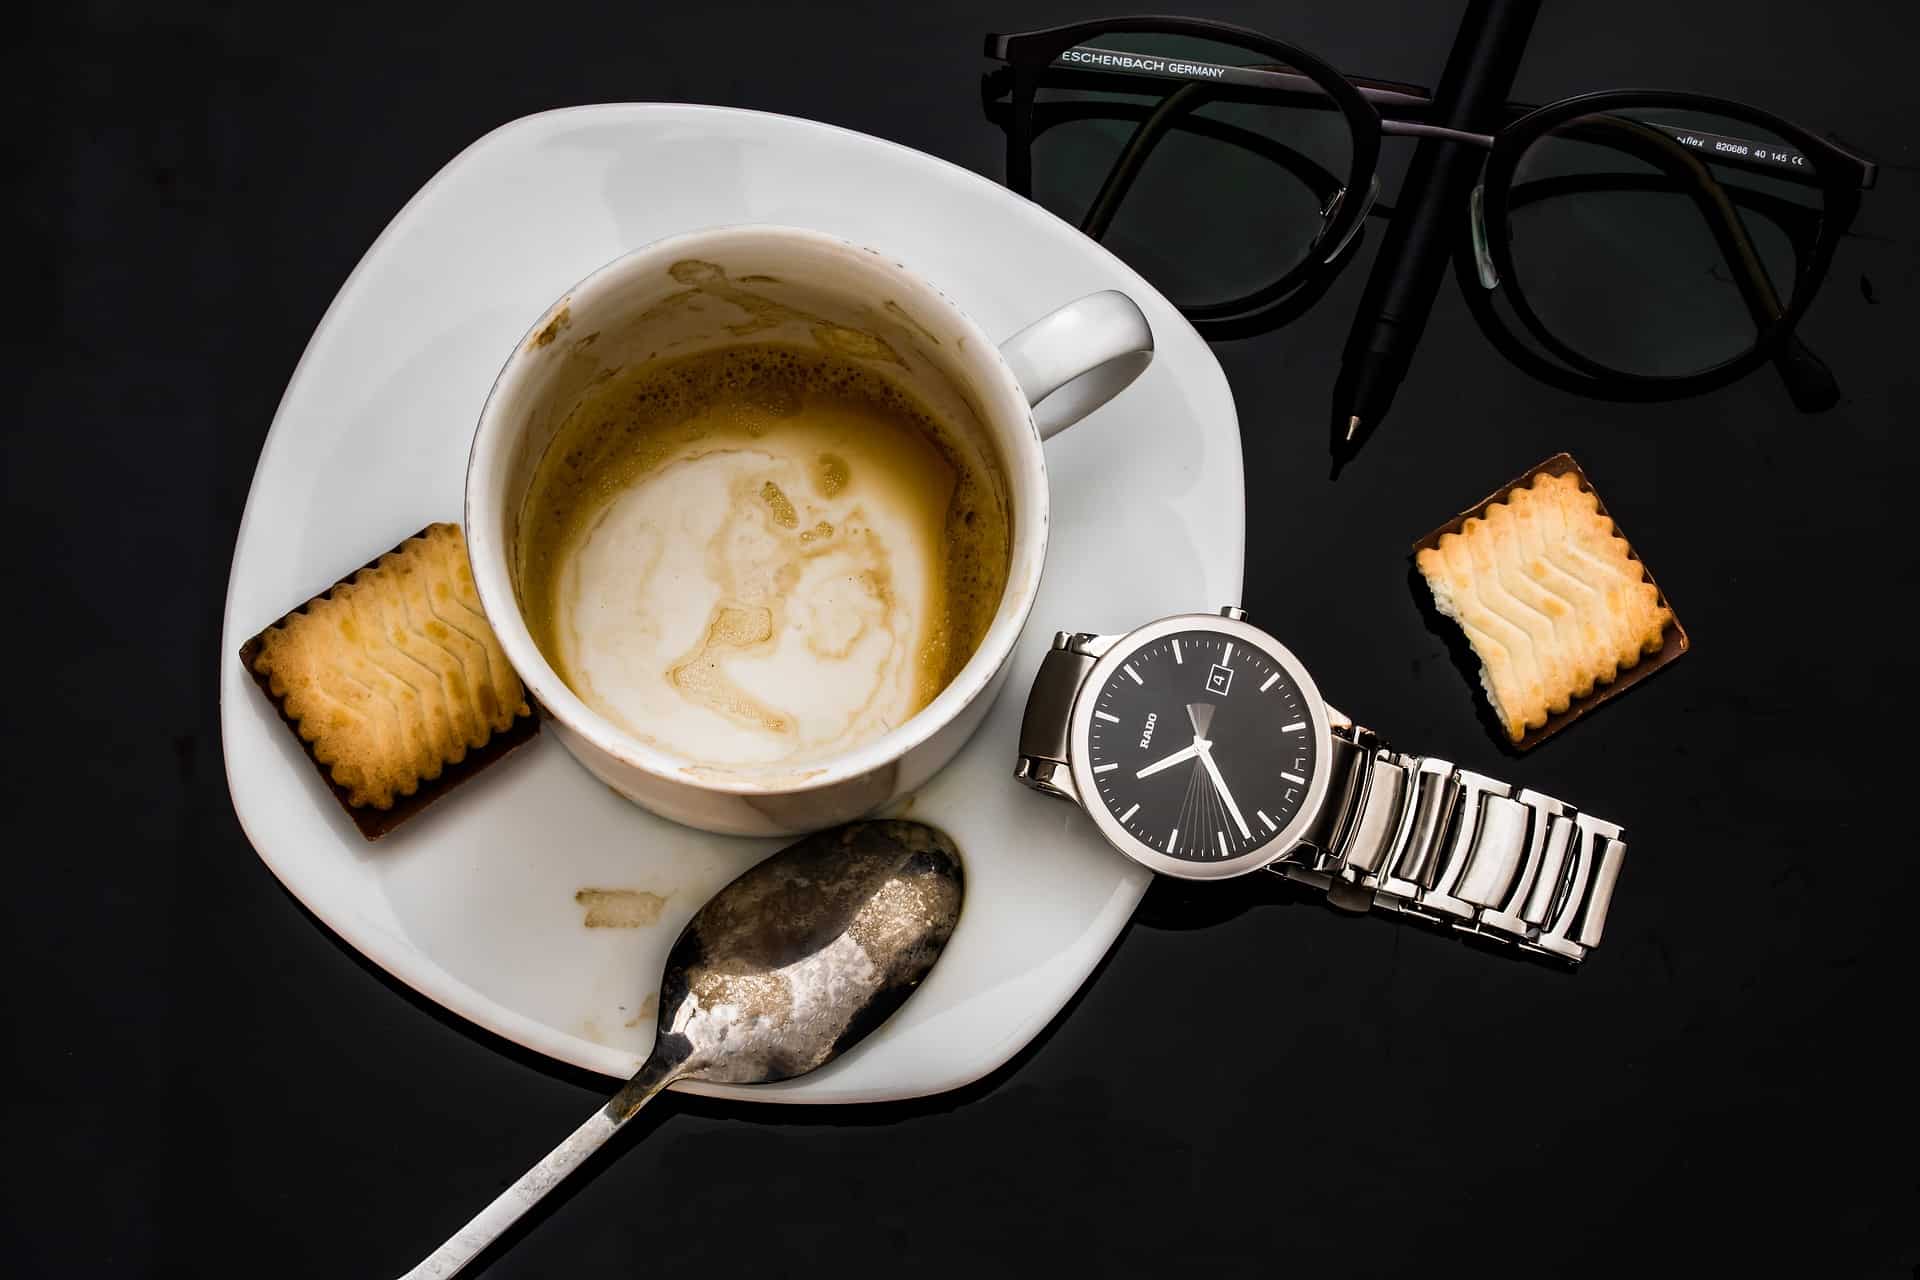 An empty coffee cup on a table along with a watch and glasses